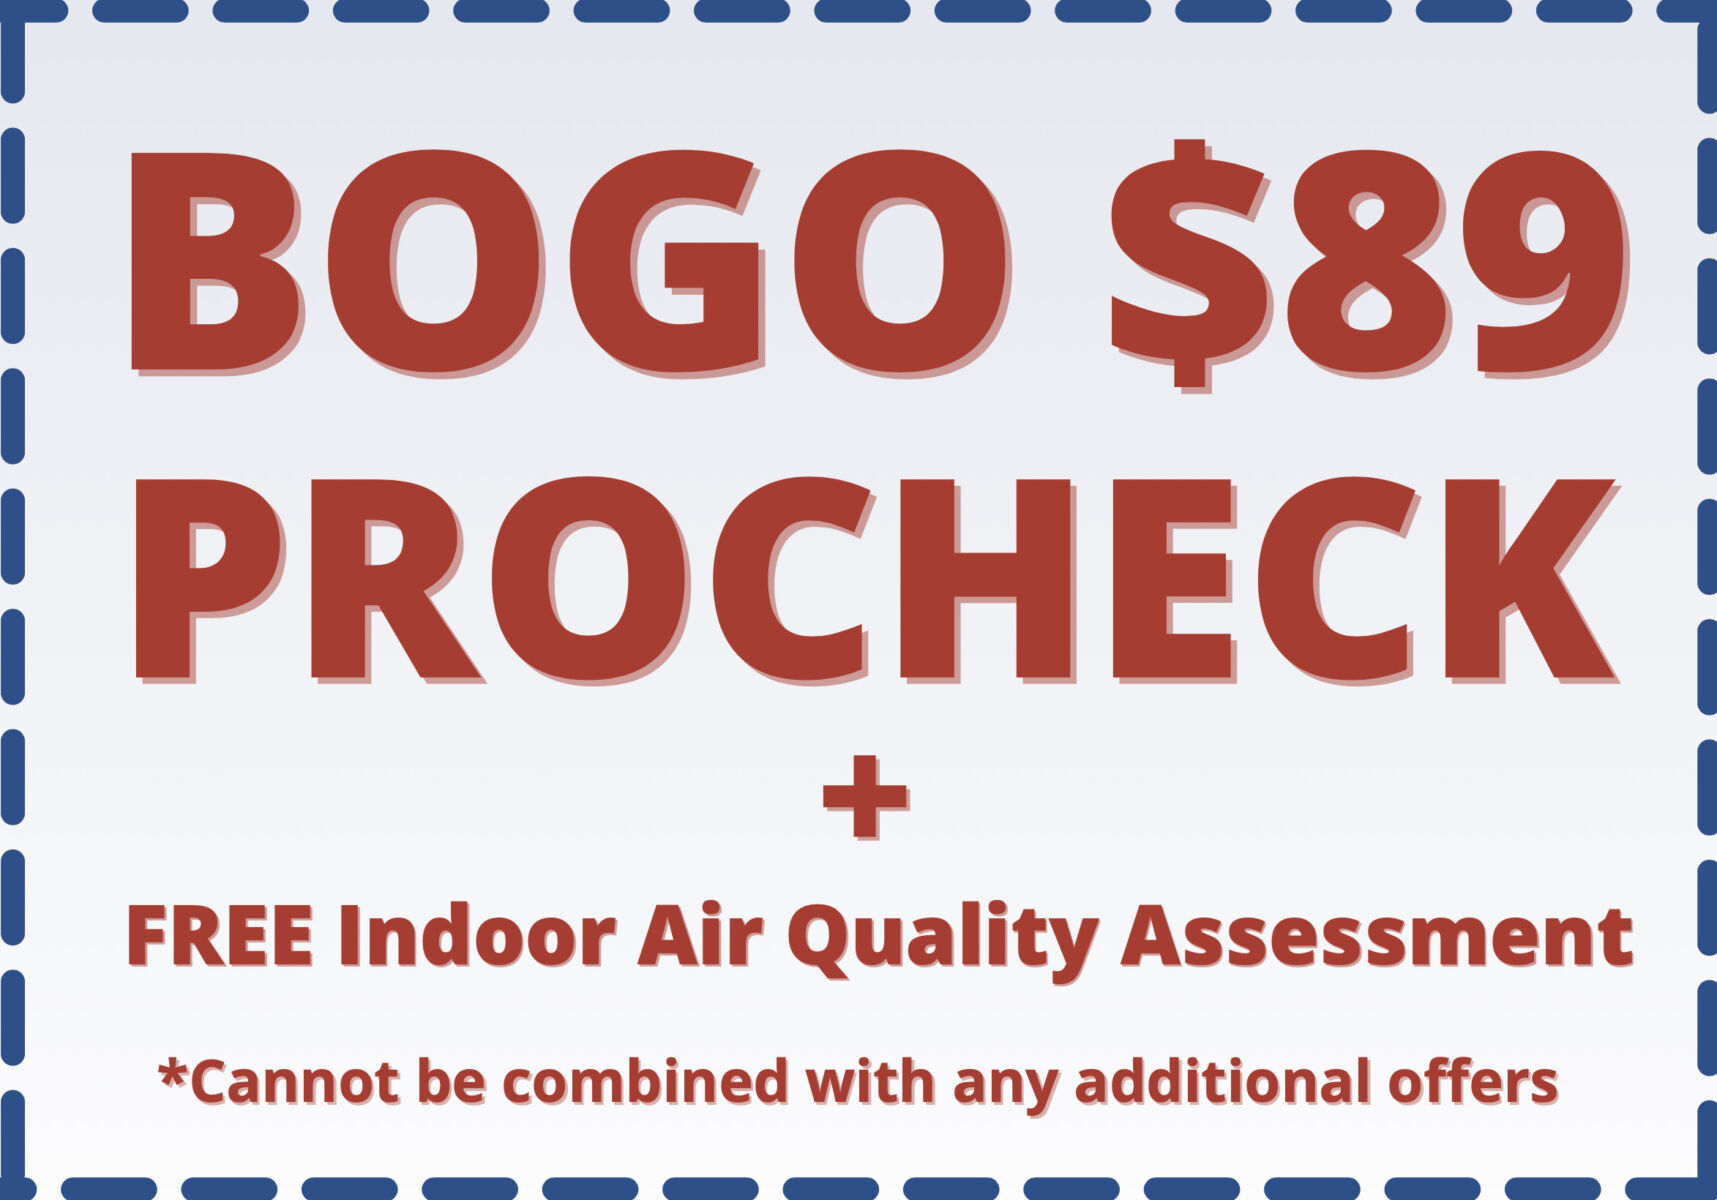 $89 BOGO ProCheck + FREE Indoor Air Quality Analysis